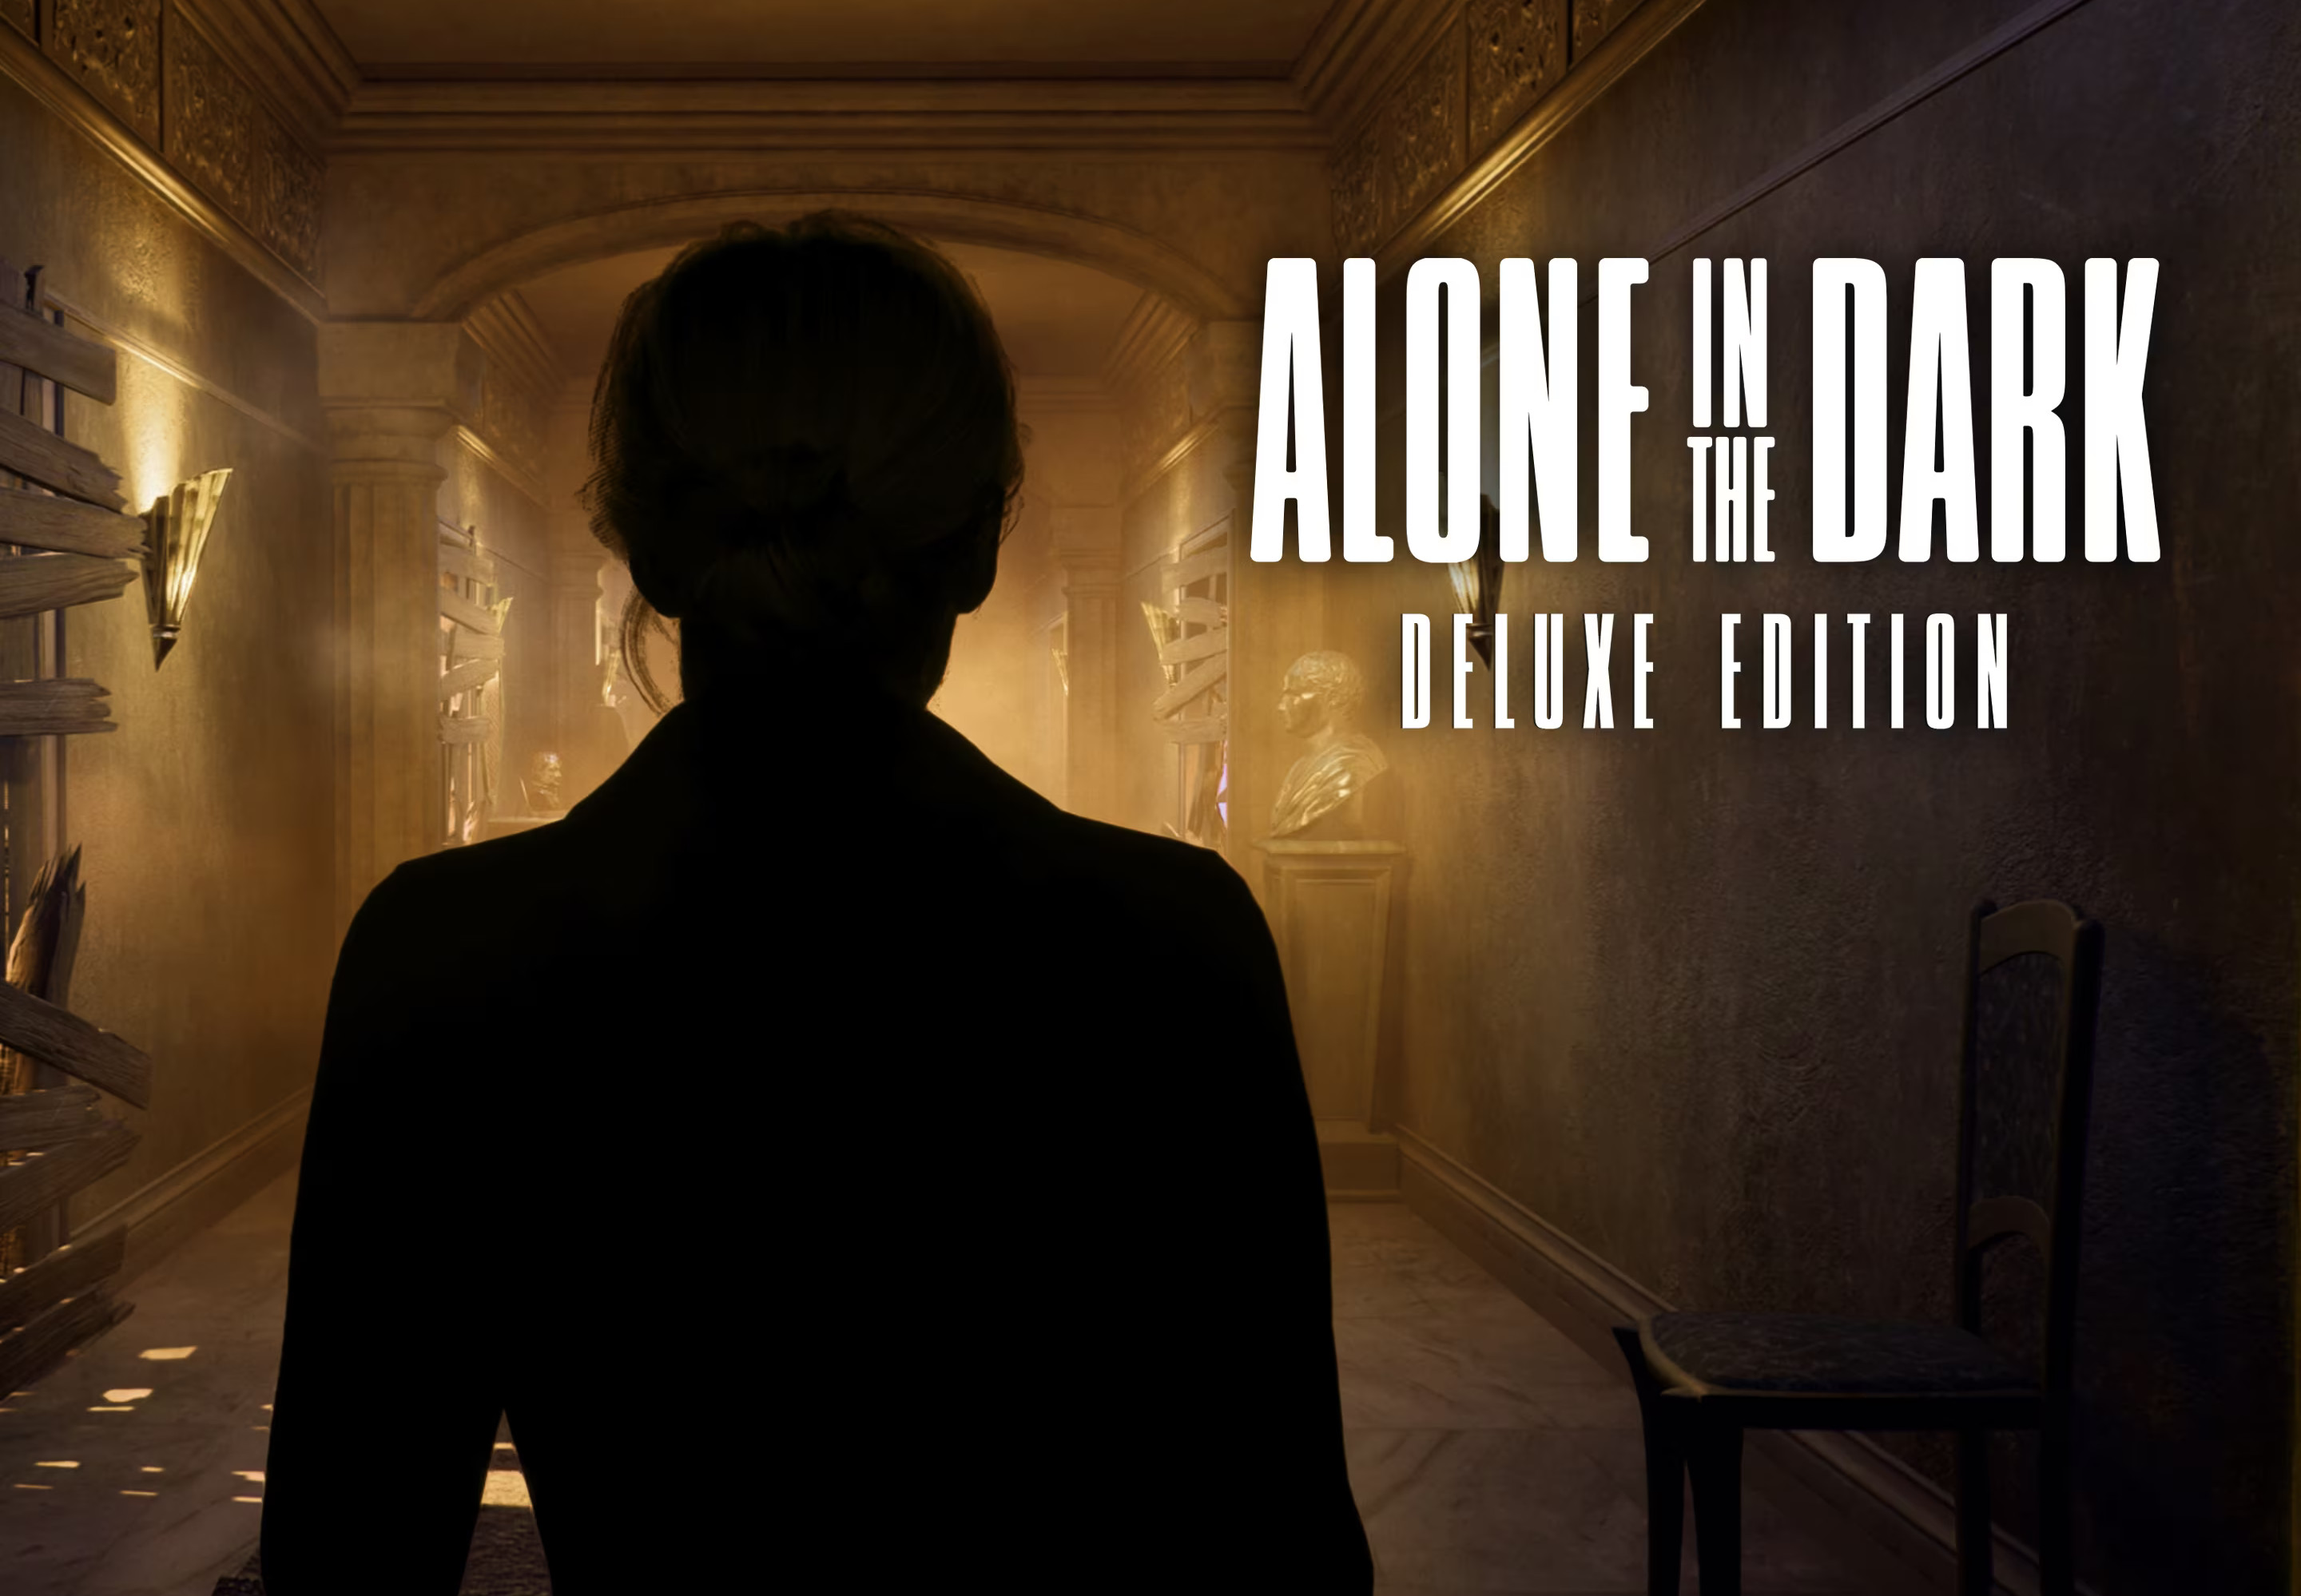 Alone in the Dark Deluxe Edition PRE-ORDER AR XBOX One / Xbox Series X|S CD Key